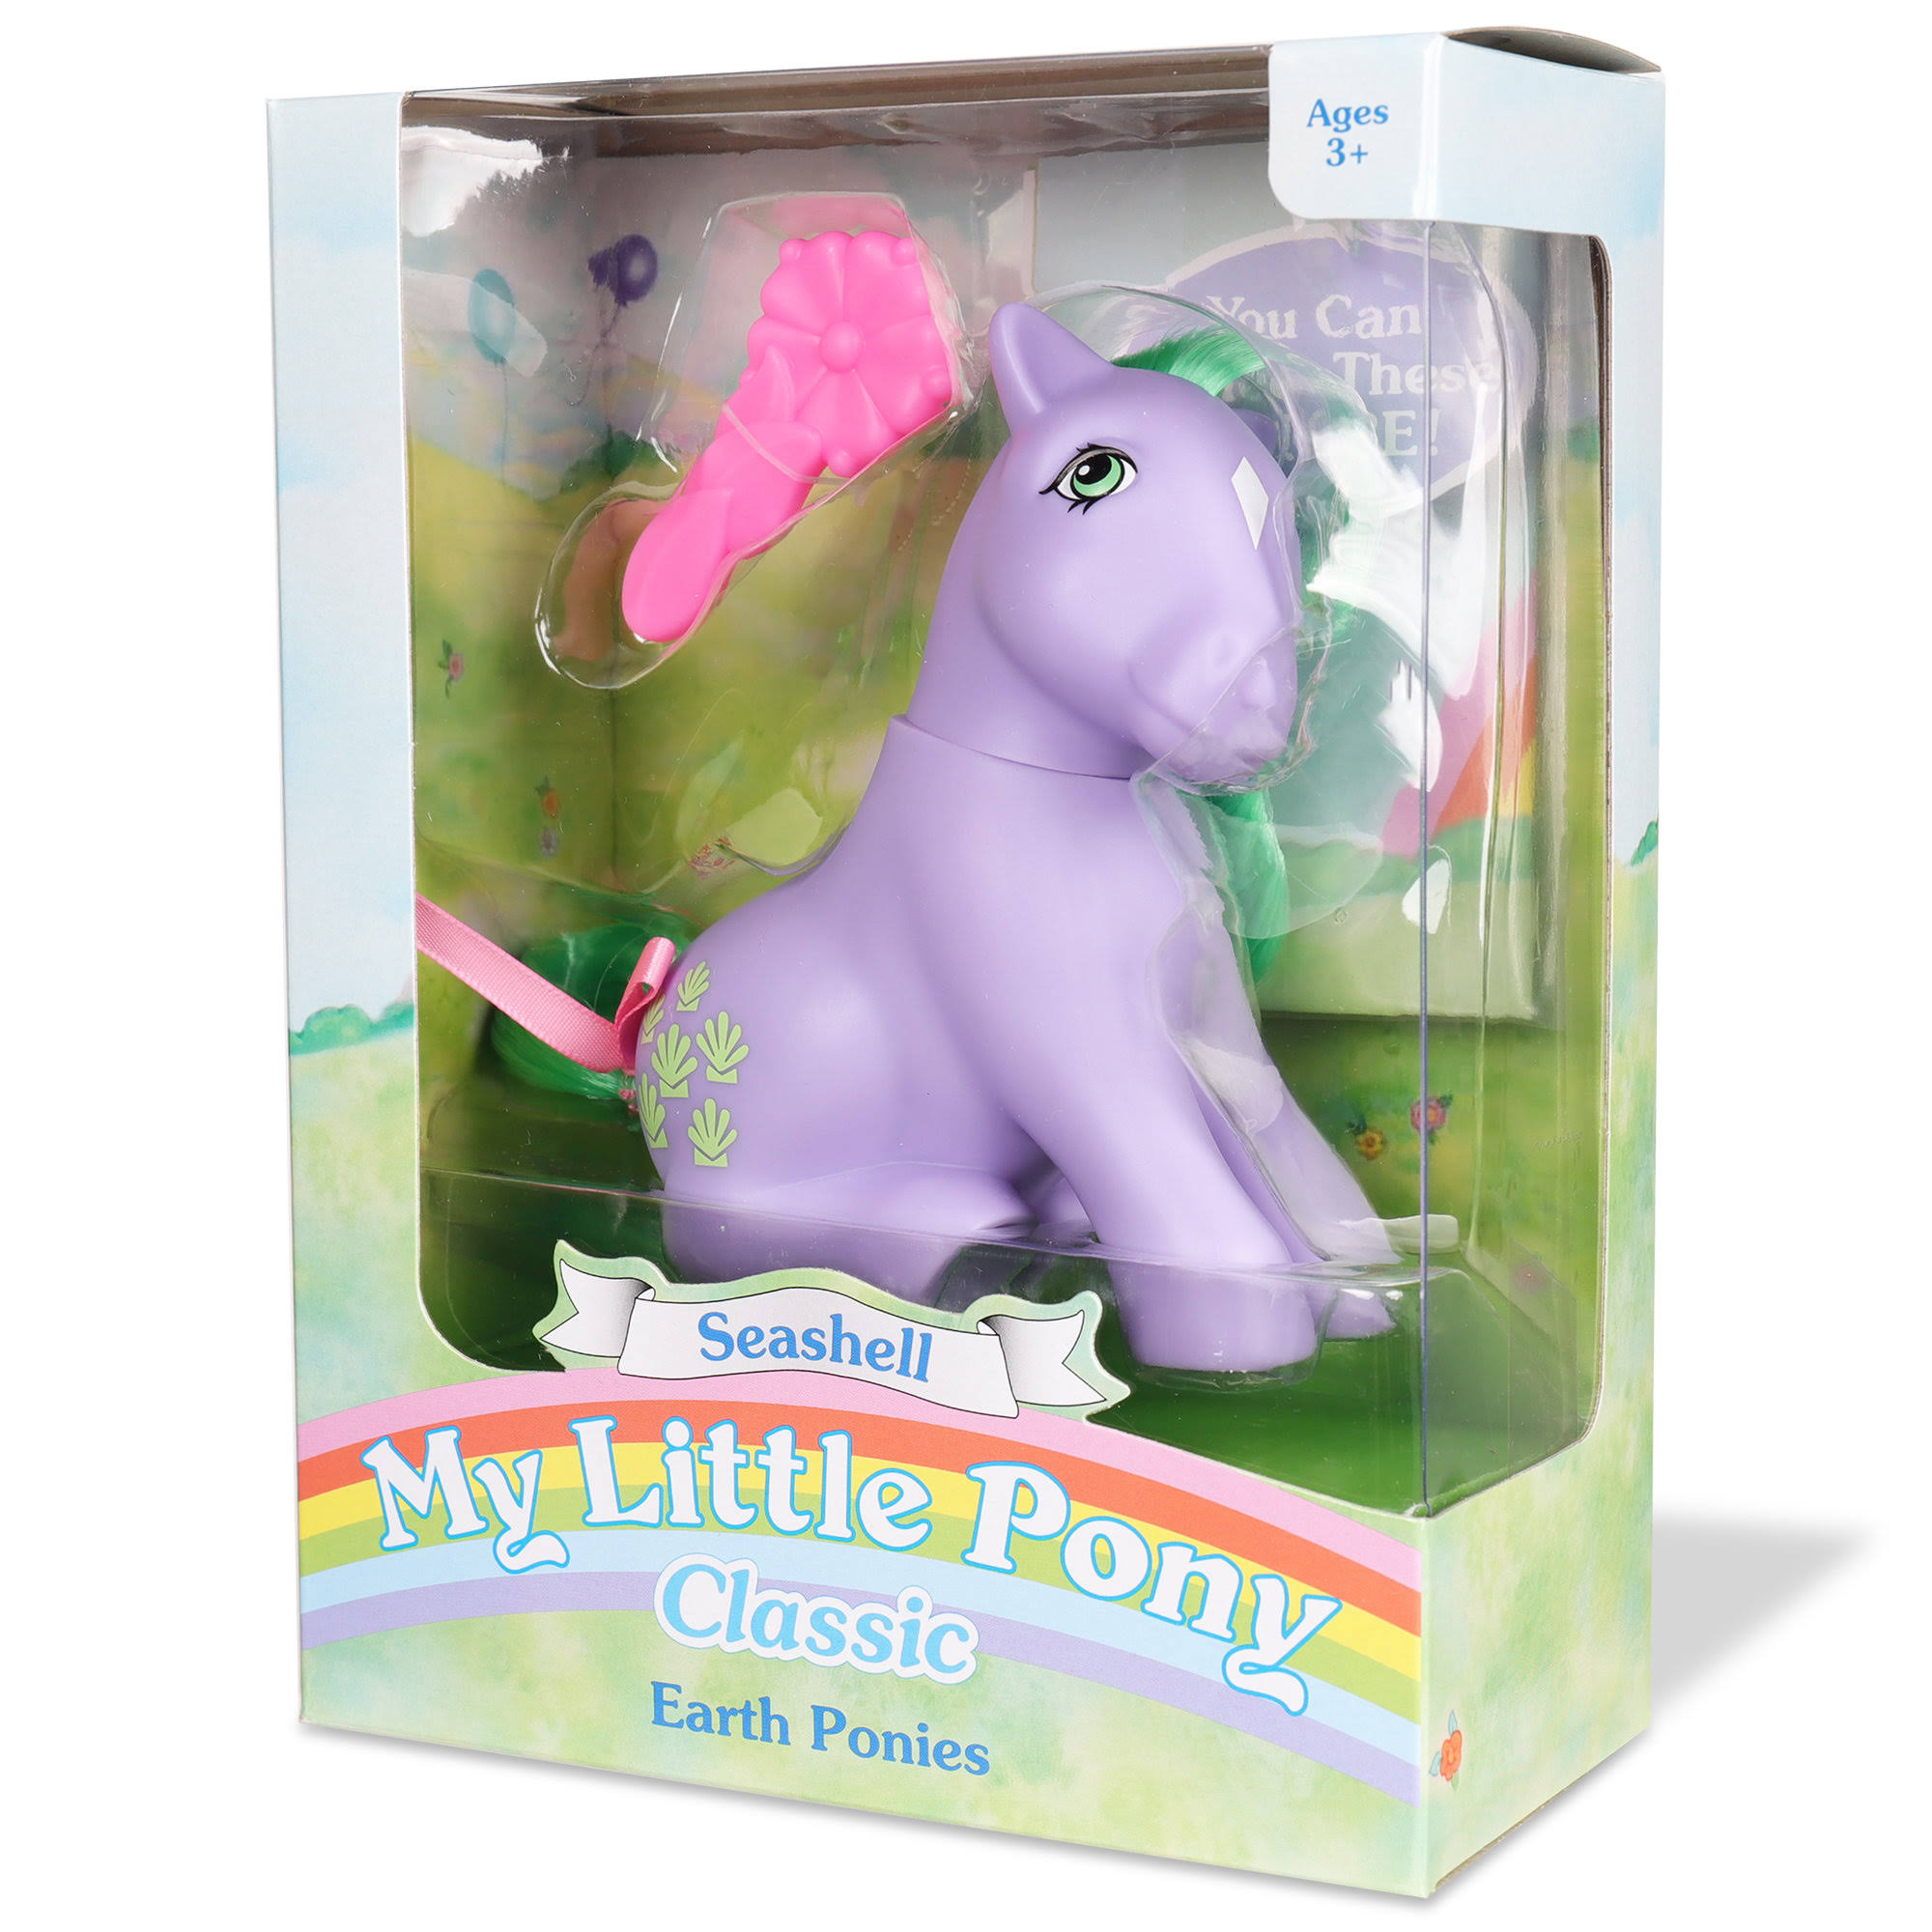 My Little Pony Classic 35TH Anniversary Collector Pony Toy